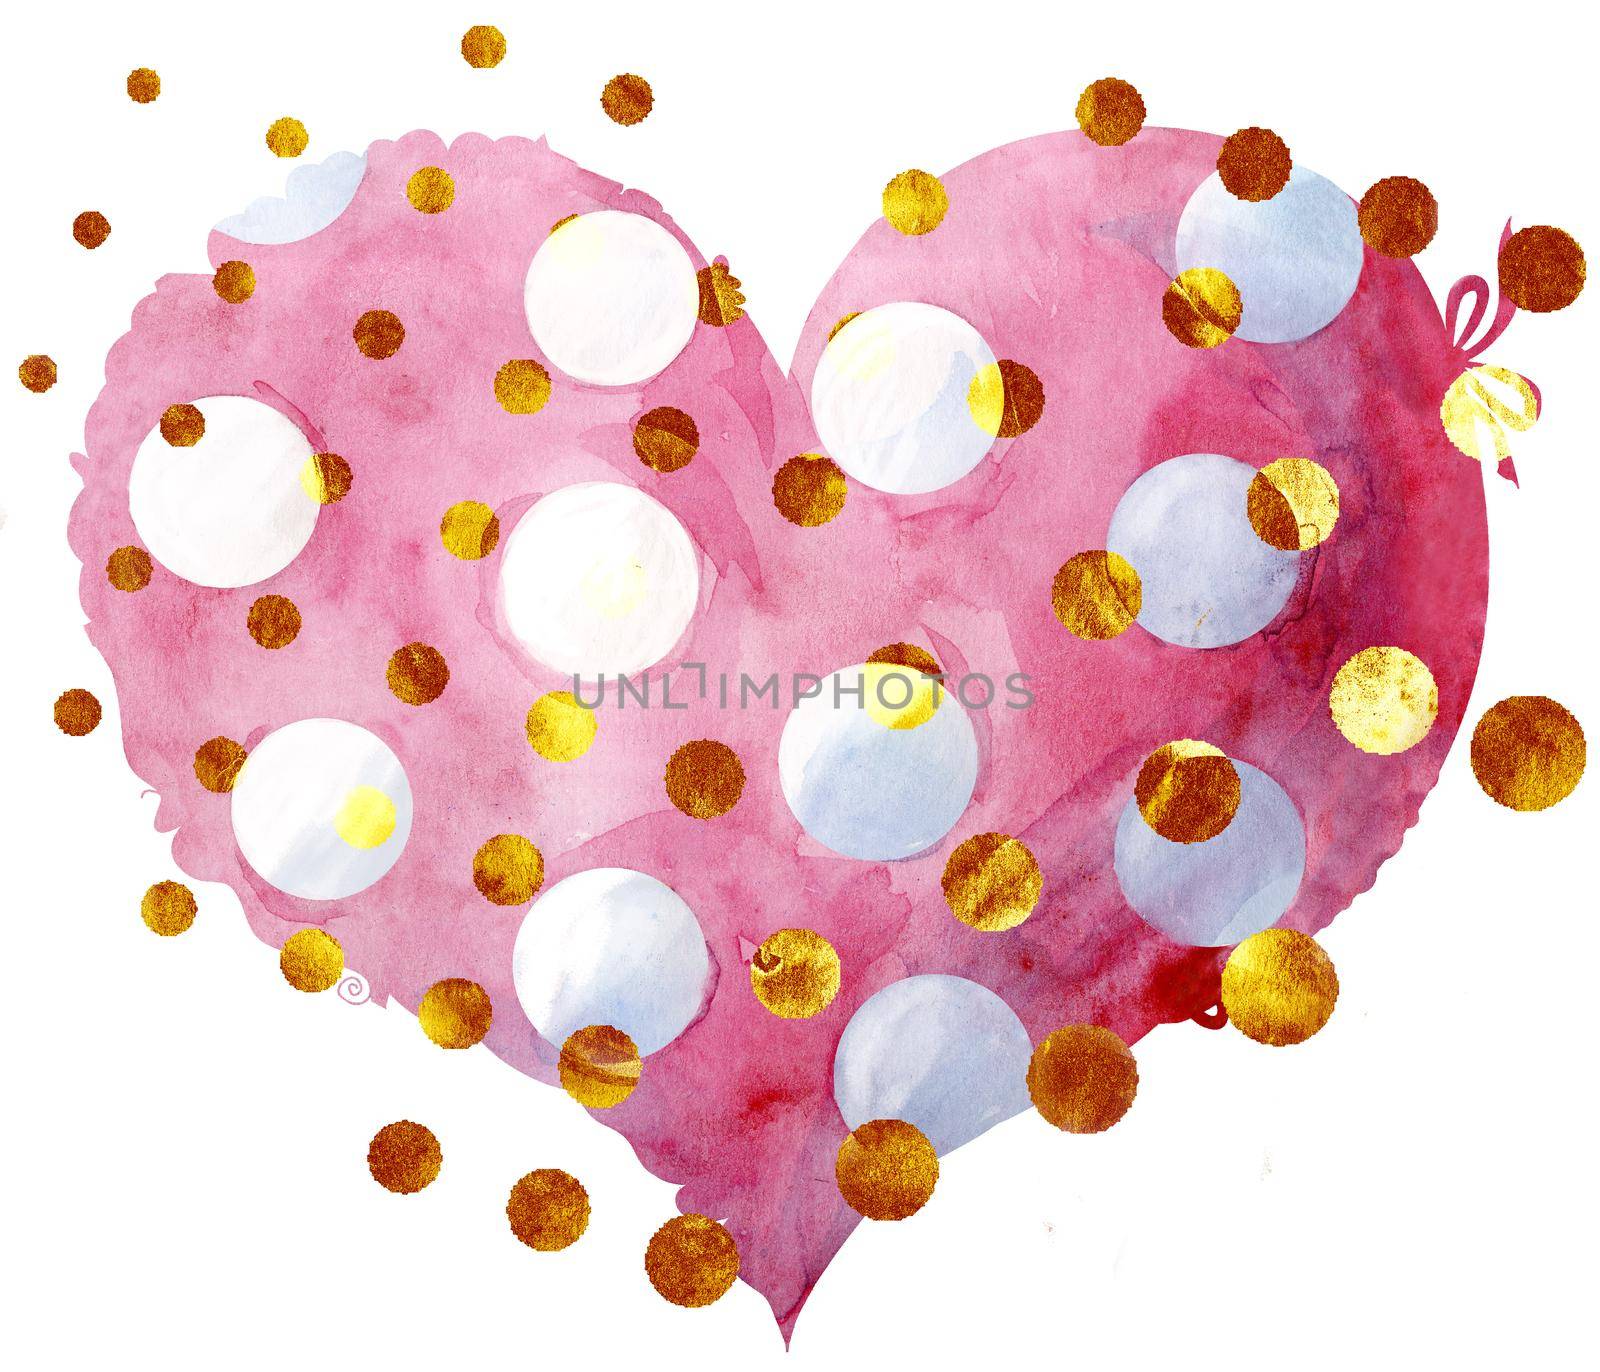 watercolor pink heart with a lace edge and gold dots by NataOmsk